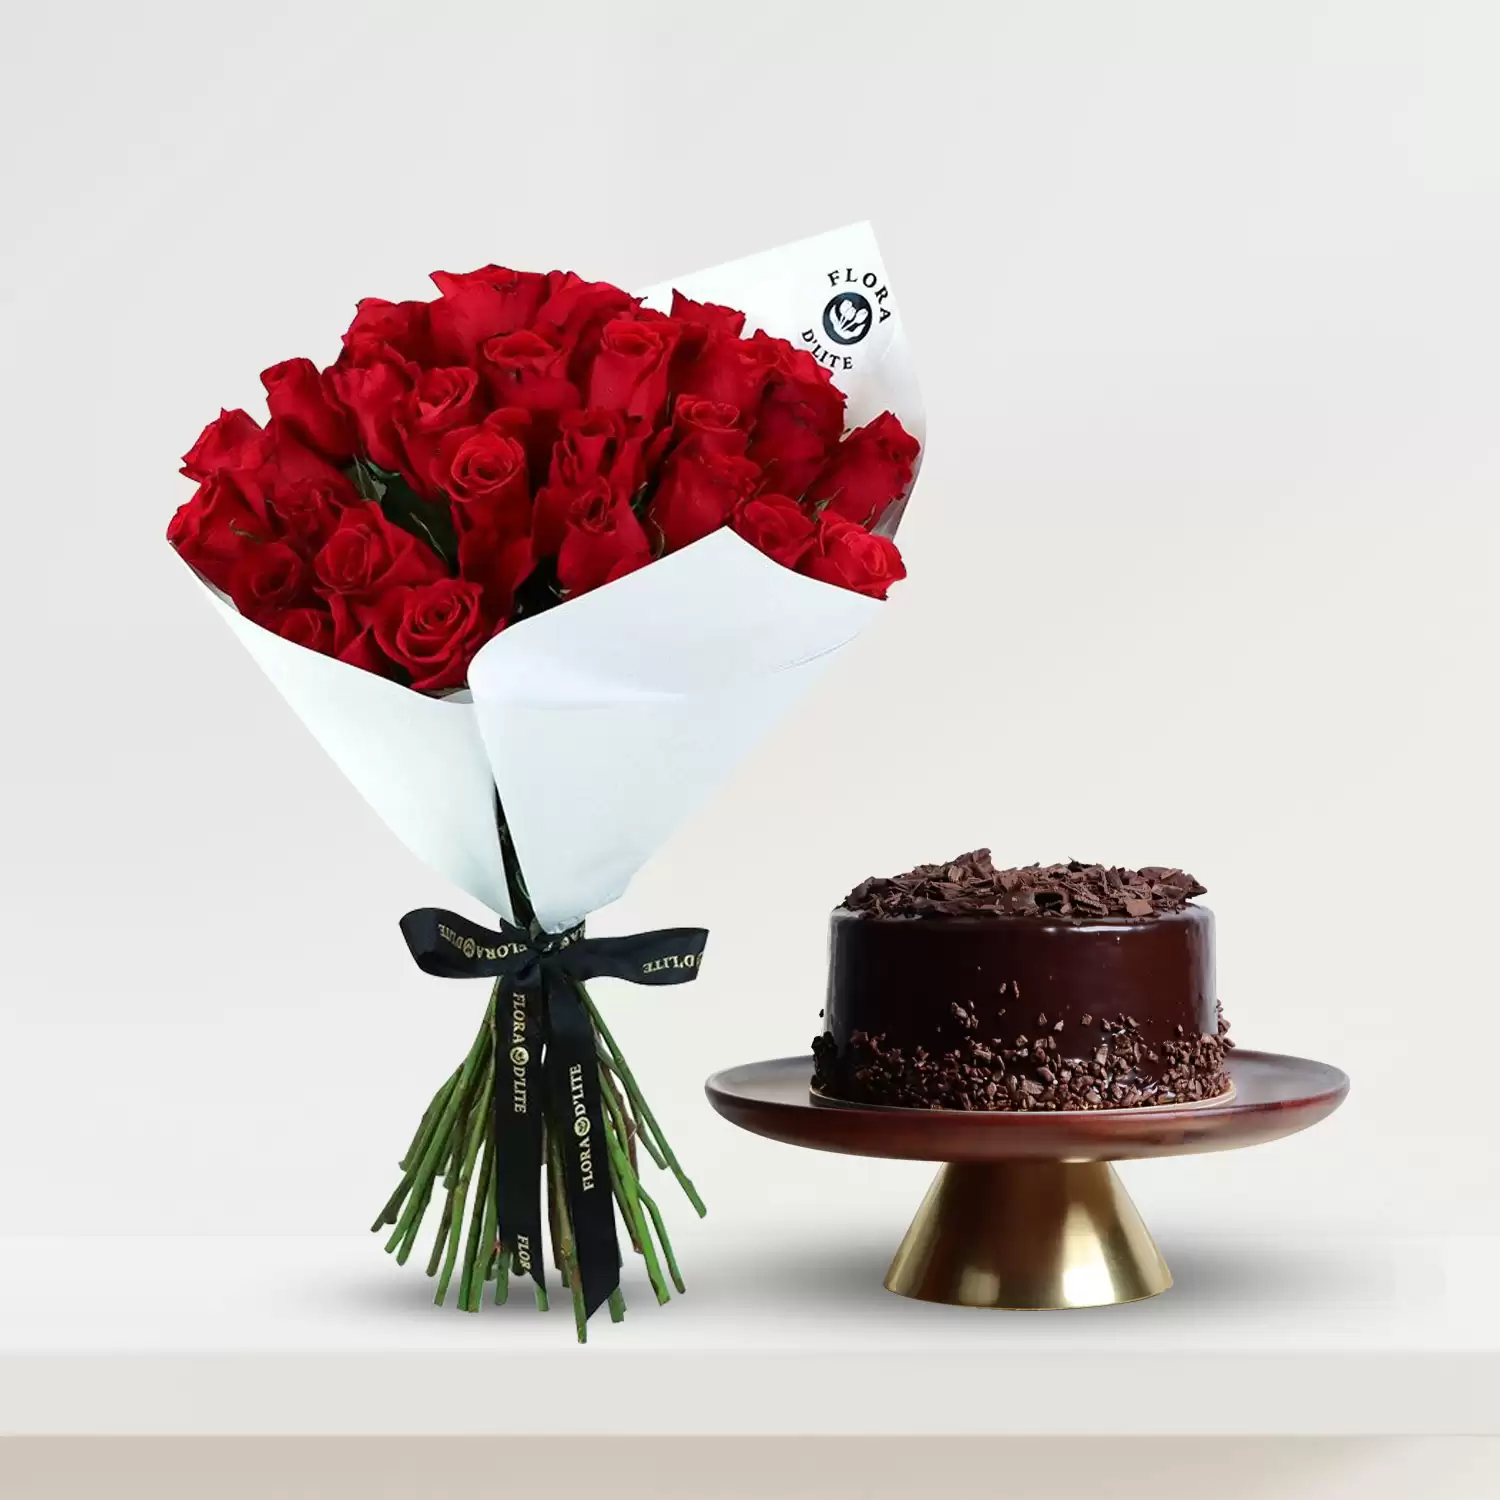 35 Rosey Bouquet & Chocolate Truffle Cake | Order Flowers & Cakes Online | Bahrain Express Delivery - Flora D'lite